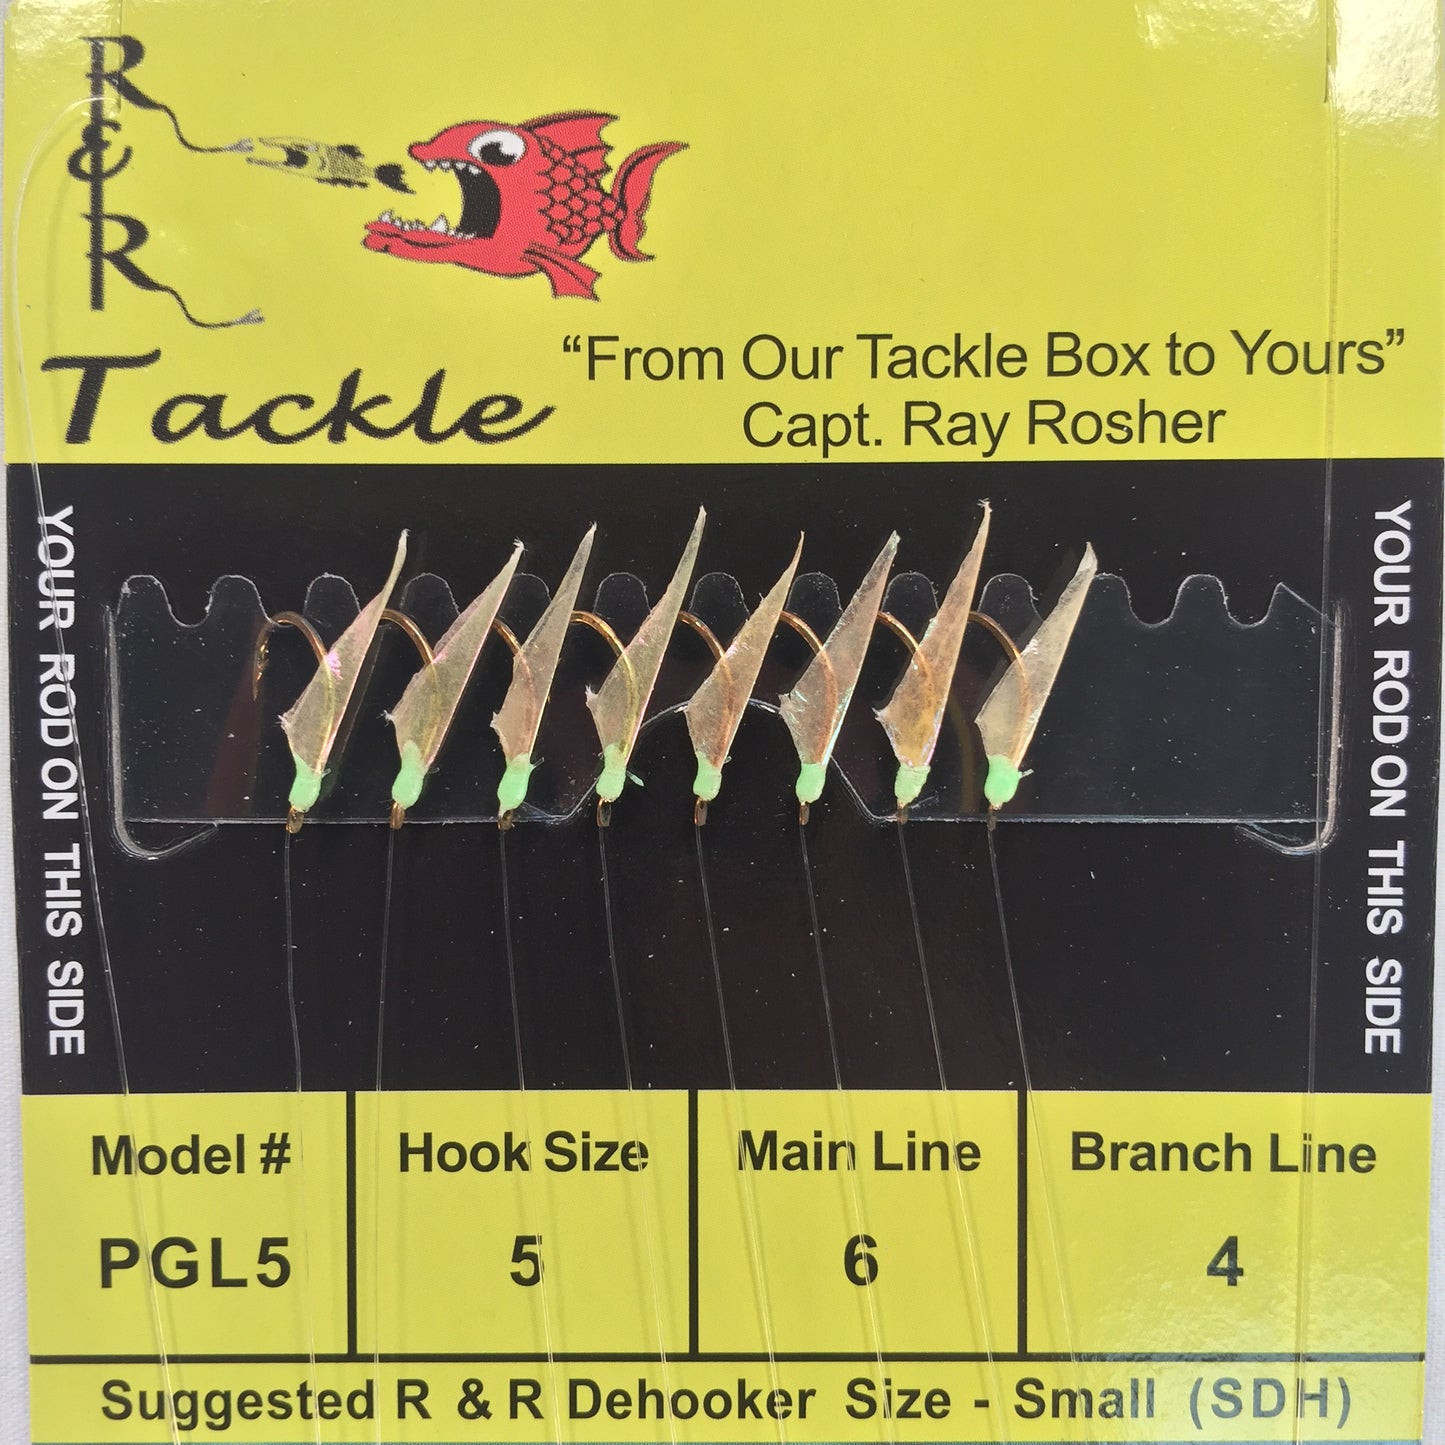 PGL5 Bait Rig - 8 (size 5) hooks with fish skin & green heads